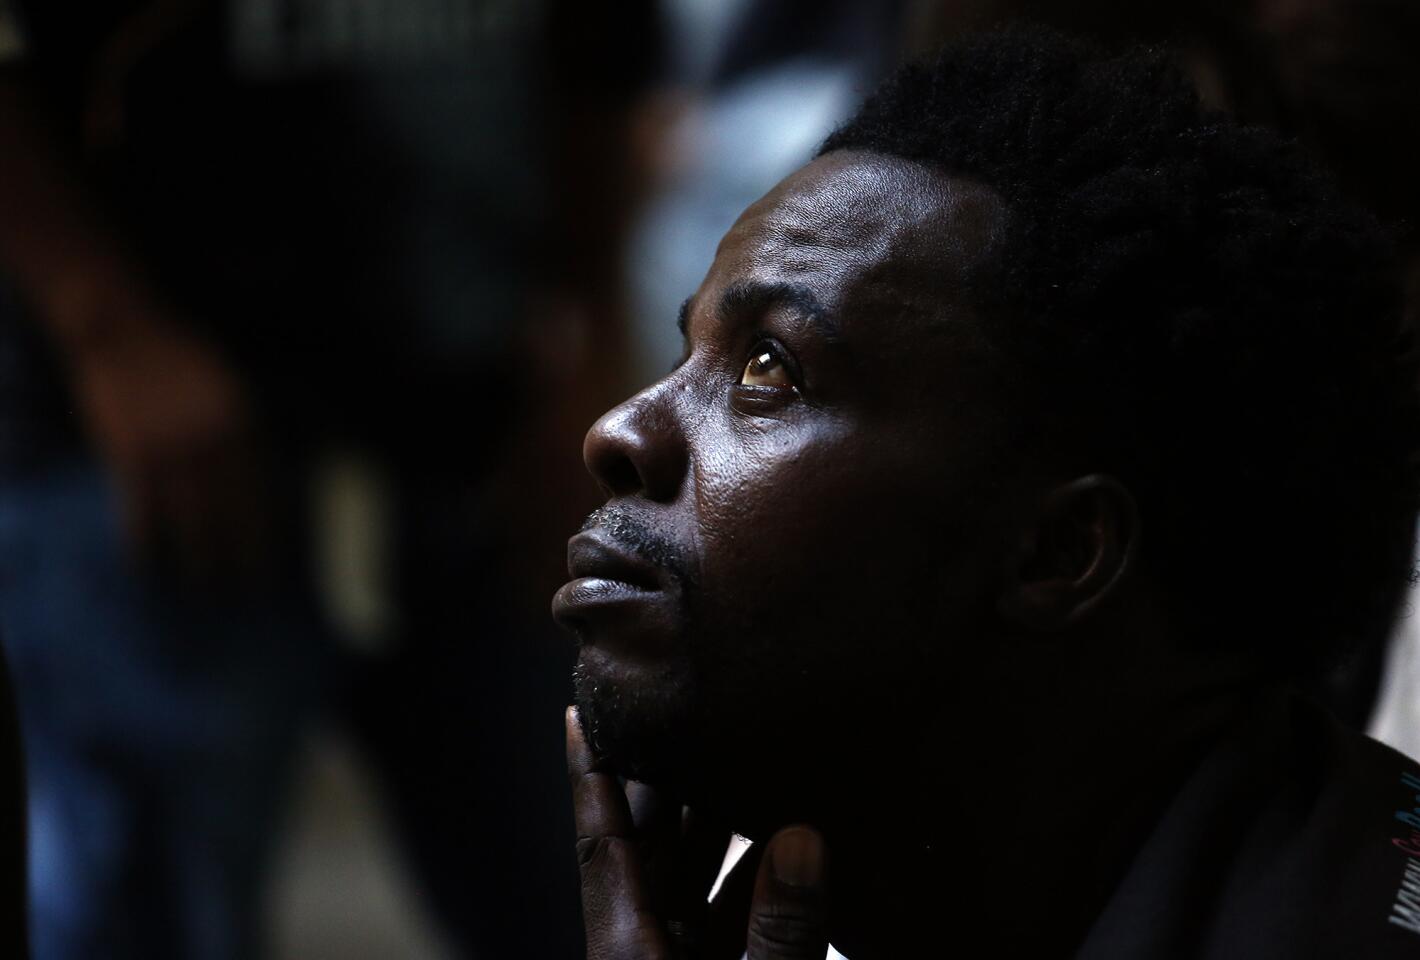 Emmanuel Philips, a migrant from Haiti, dreams of going to the United States.